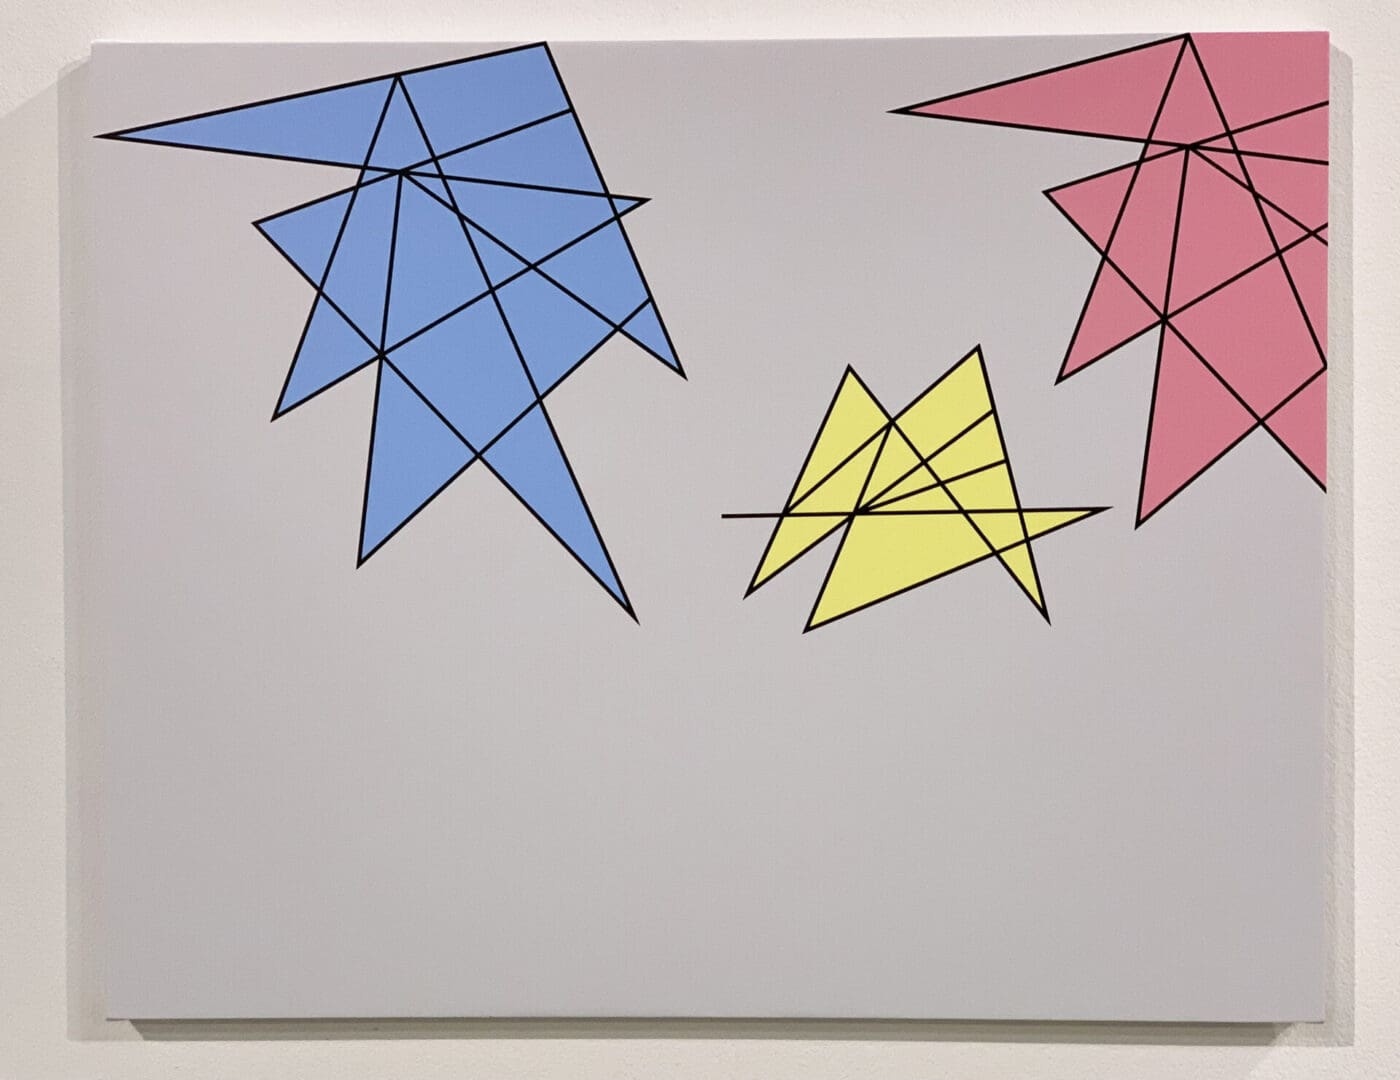 CLIFFORD SINGER, GEOMETRICAL BIRDS, 1975©, ARCHIVAL INK ON CANVAS, 32 x 40 INCHES